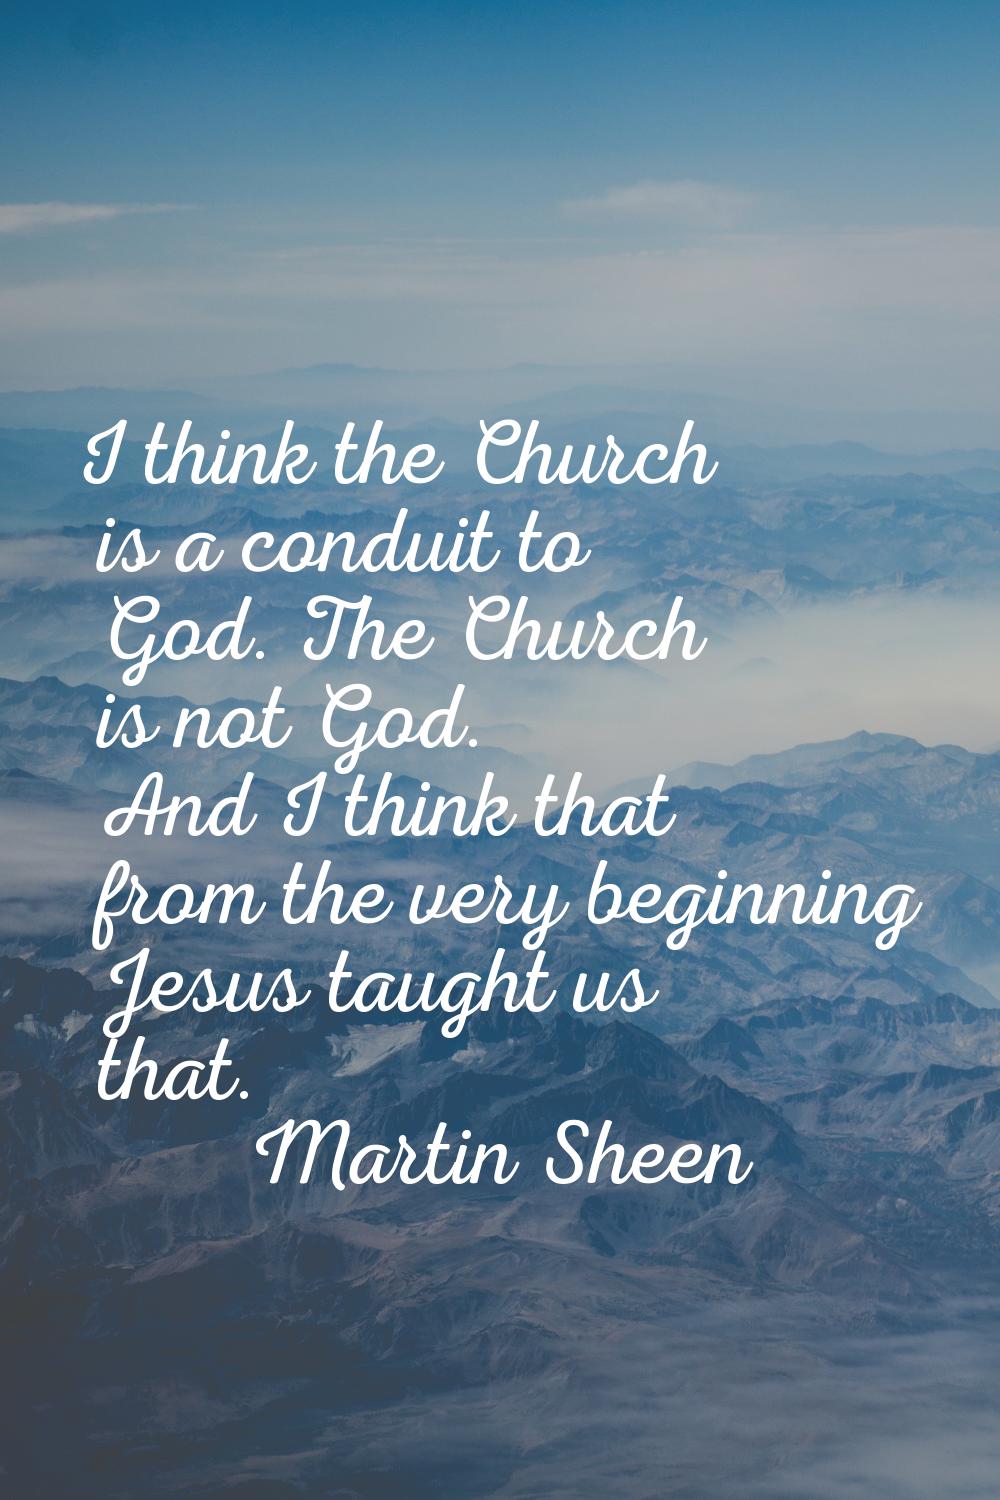 I think the Church is a conduit to God. The Church is not God. And I think that from the very begin